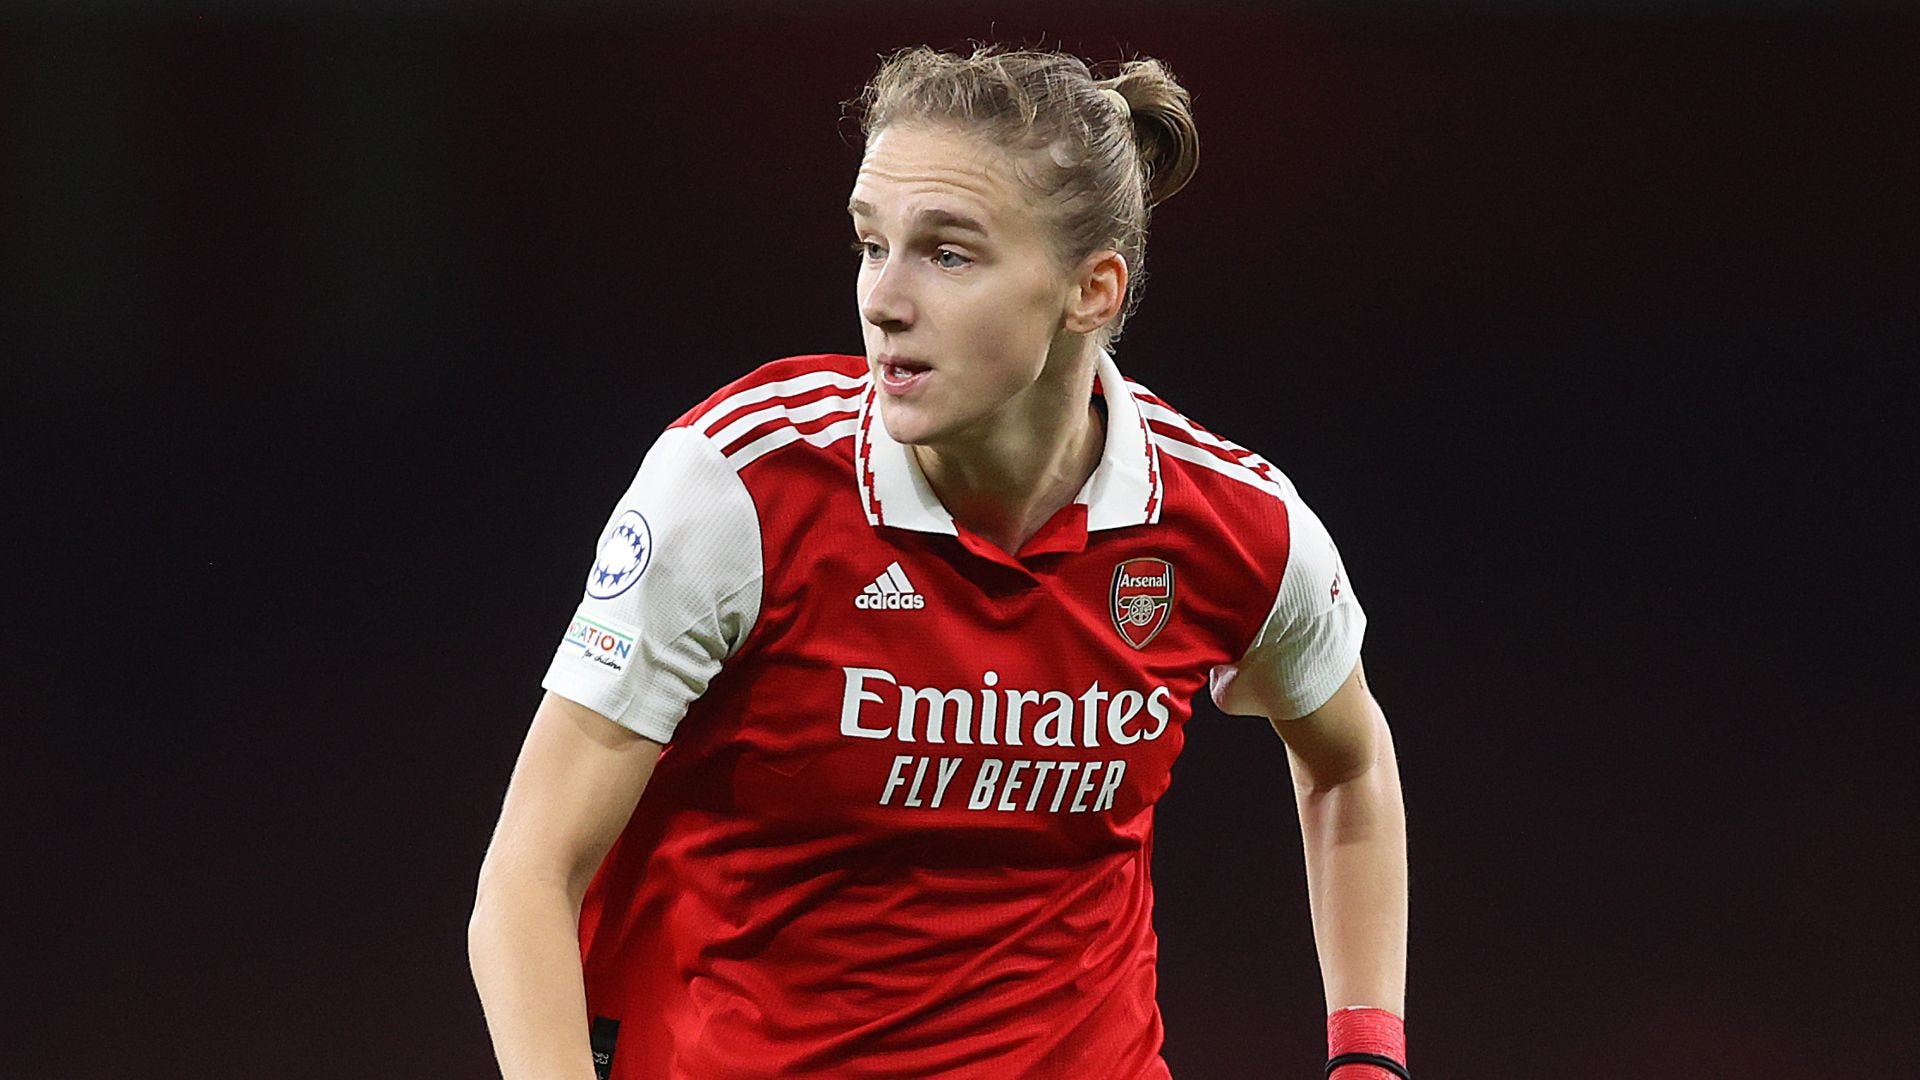 How will my knee hold up?' - Arsenal Women star Vivianne Miedema admits to  doubts as she closes in on 'scary' return from ACL injury